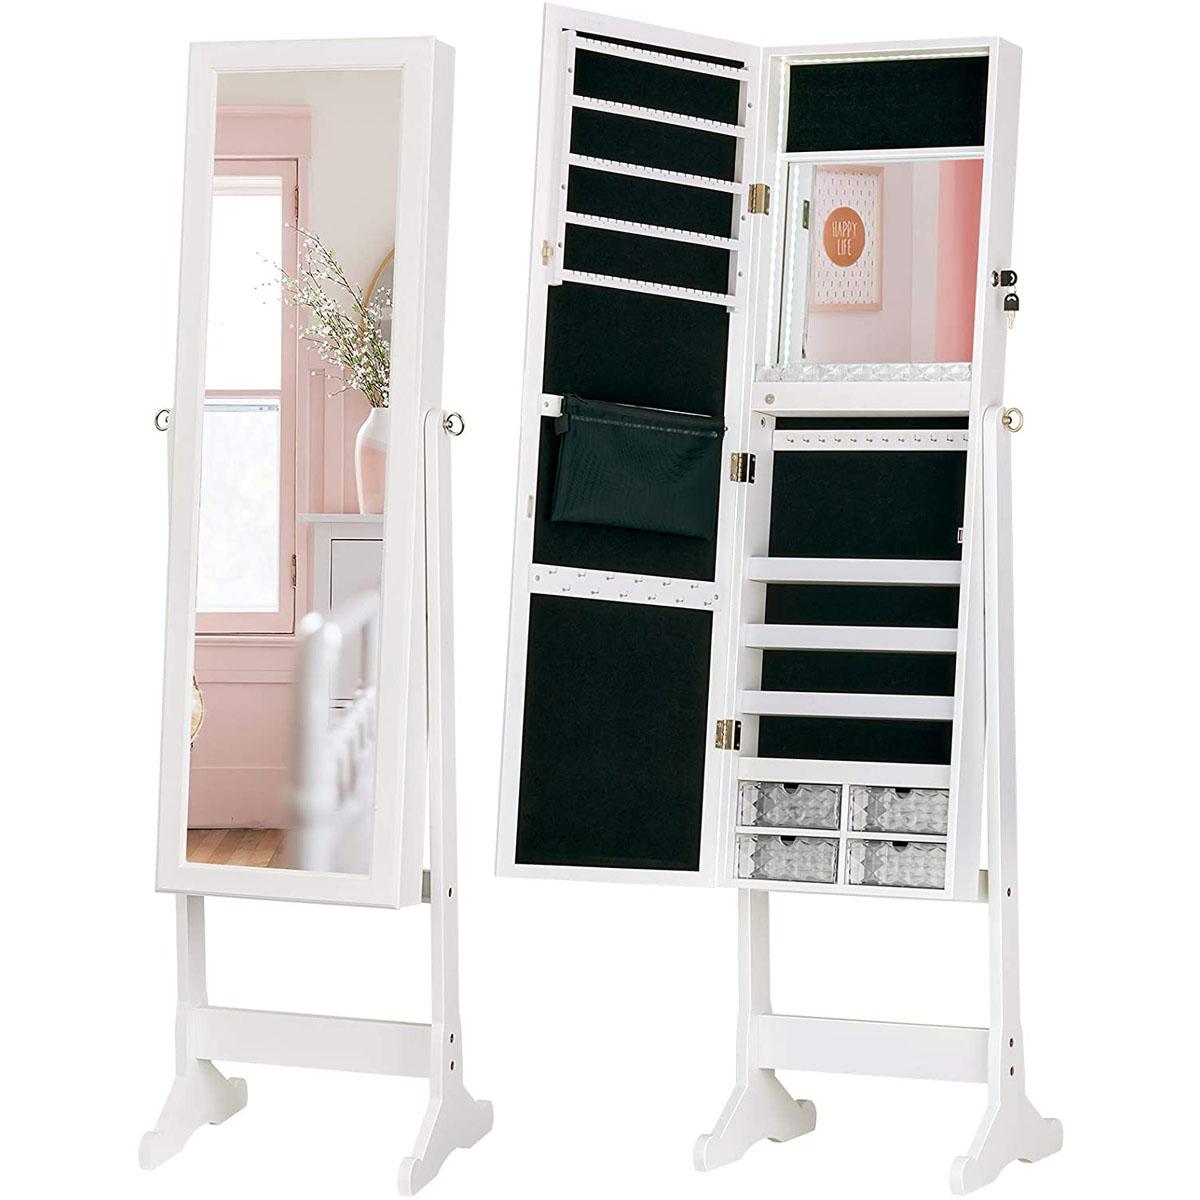 LED Light Jewelry Cabinet Mirror Makeup Lockable Armoire for $127.90 Shipped